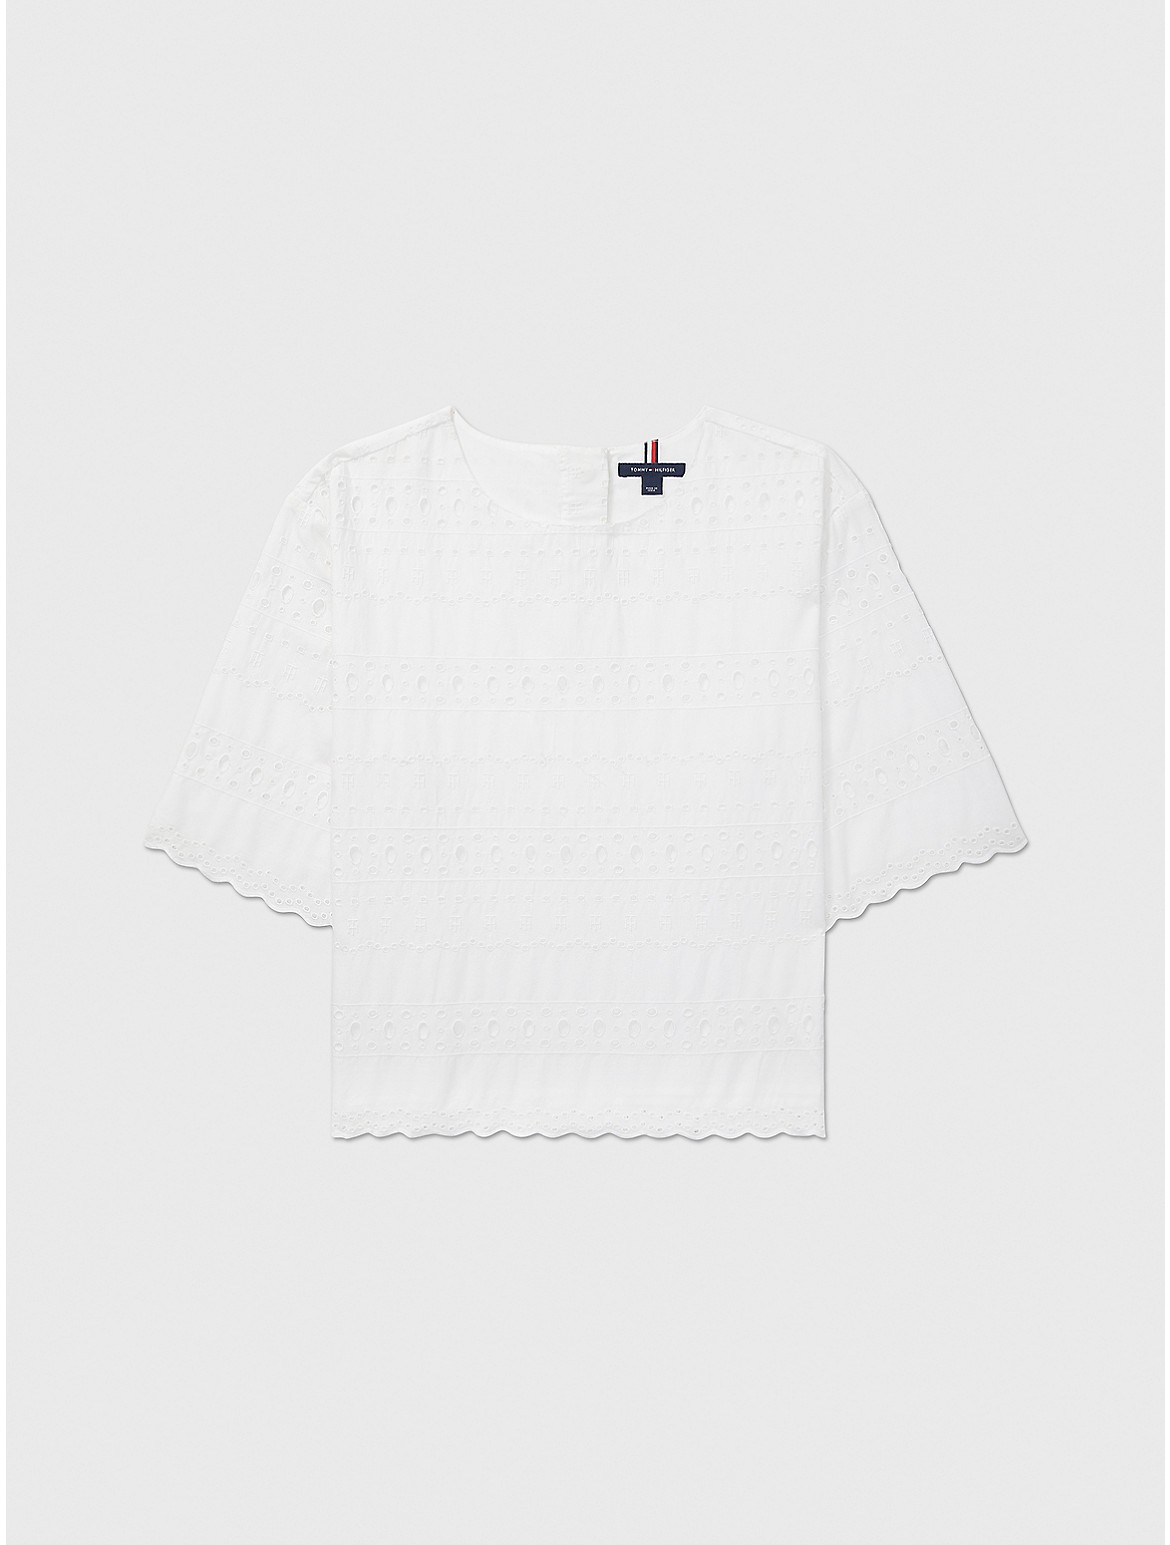 Tommy Hilfiger Women's Embroidered Top - White - S